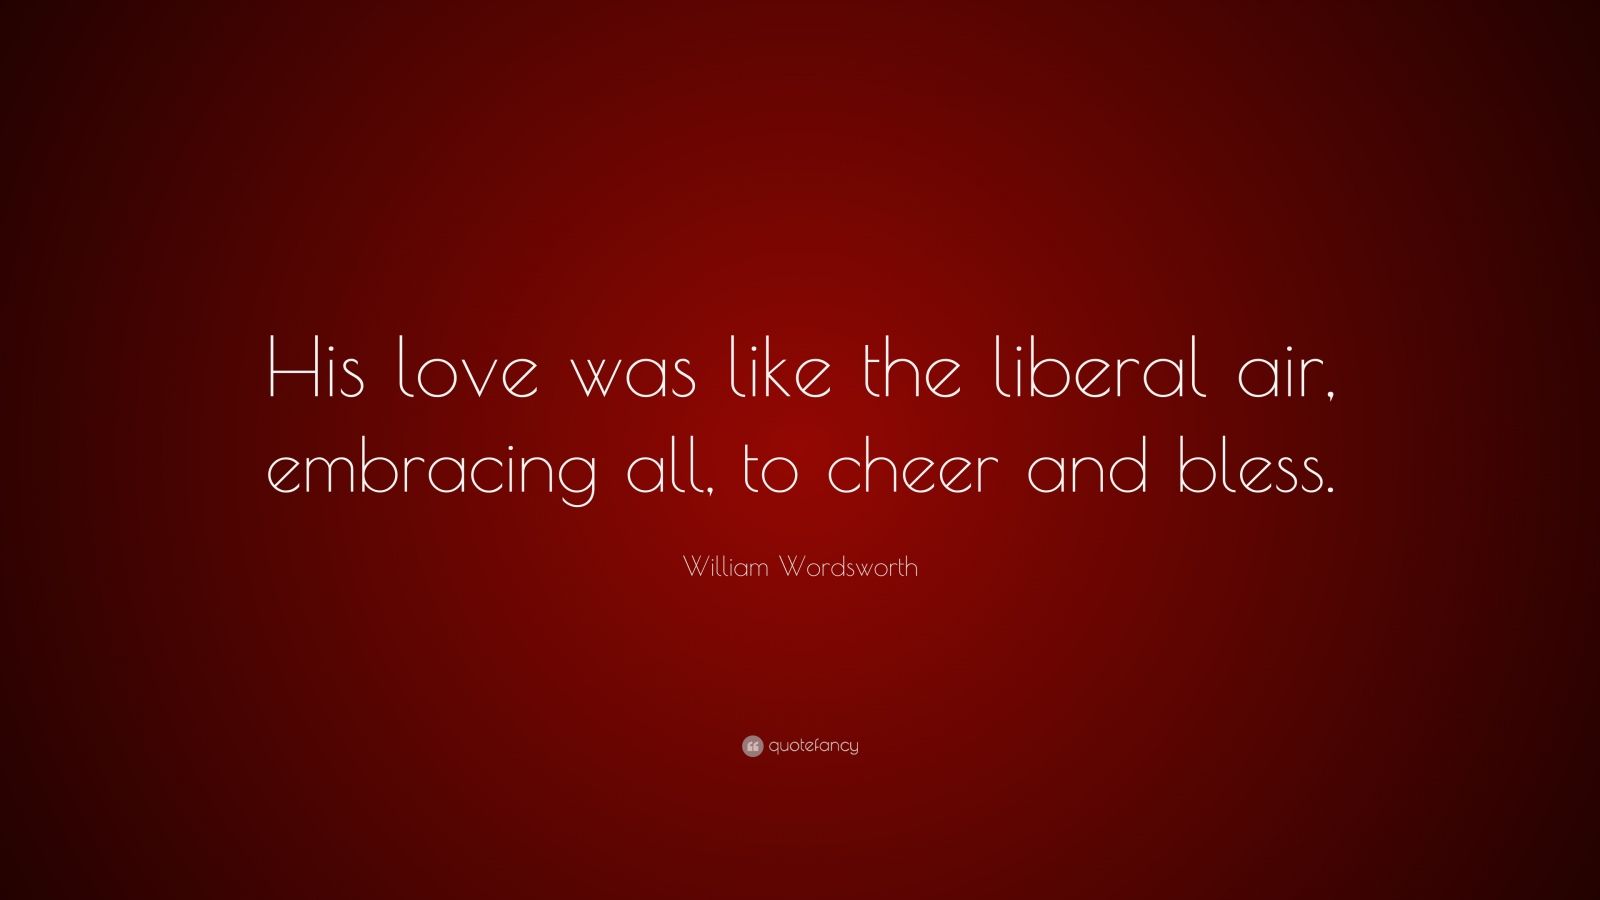 William Wordsworth Quote “His love was like the liberal air embracing all